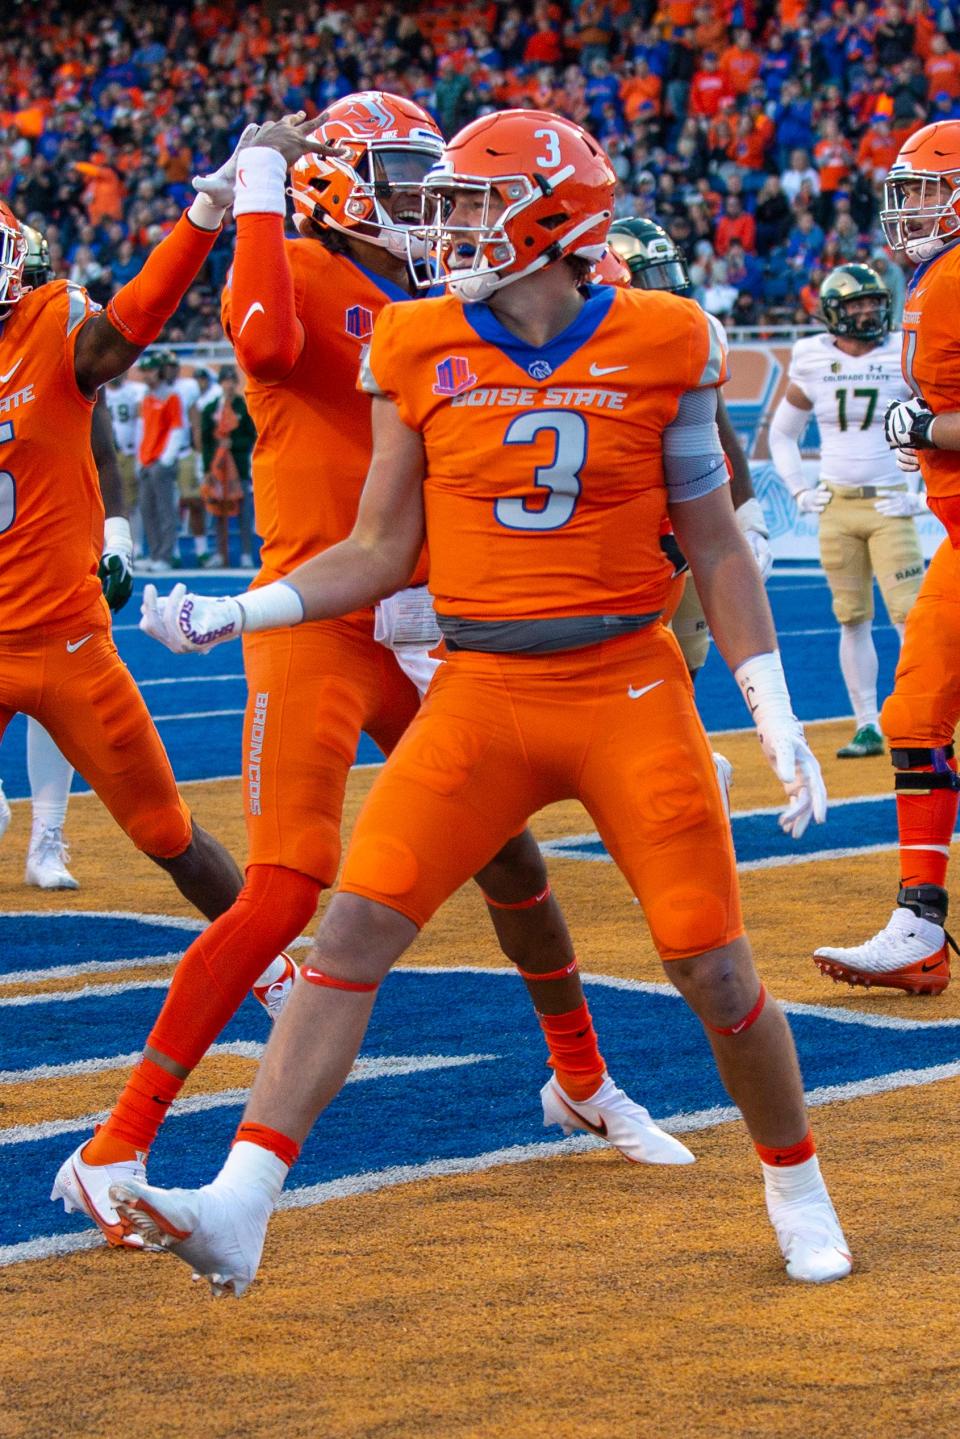 Boise State Broncos tight end Riley Smith (3) reacts after scoring against Colorado State on Oct. 29.